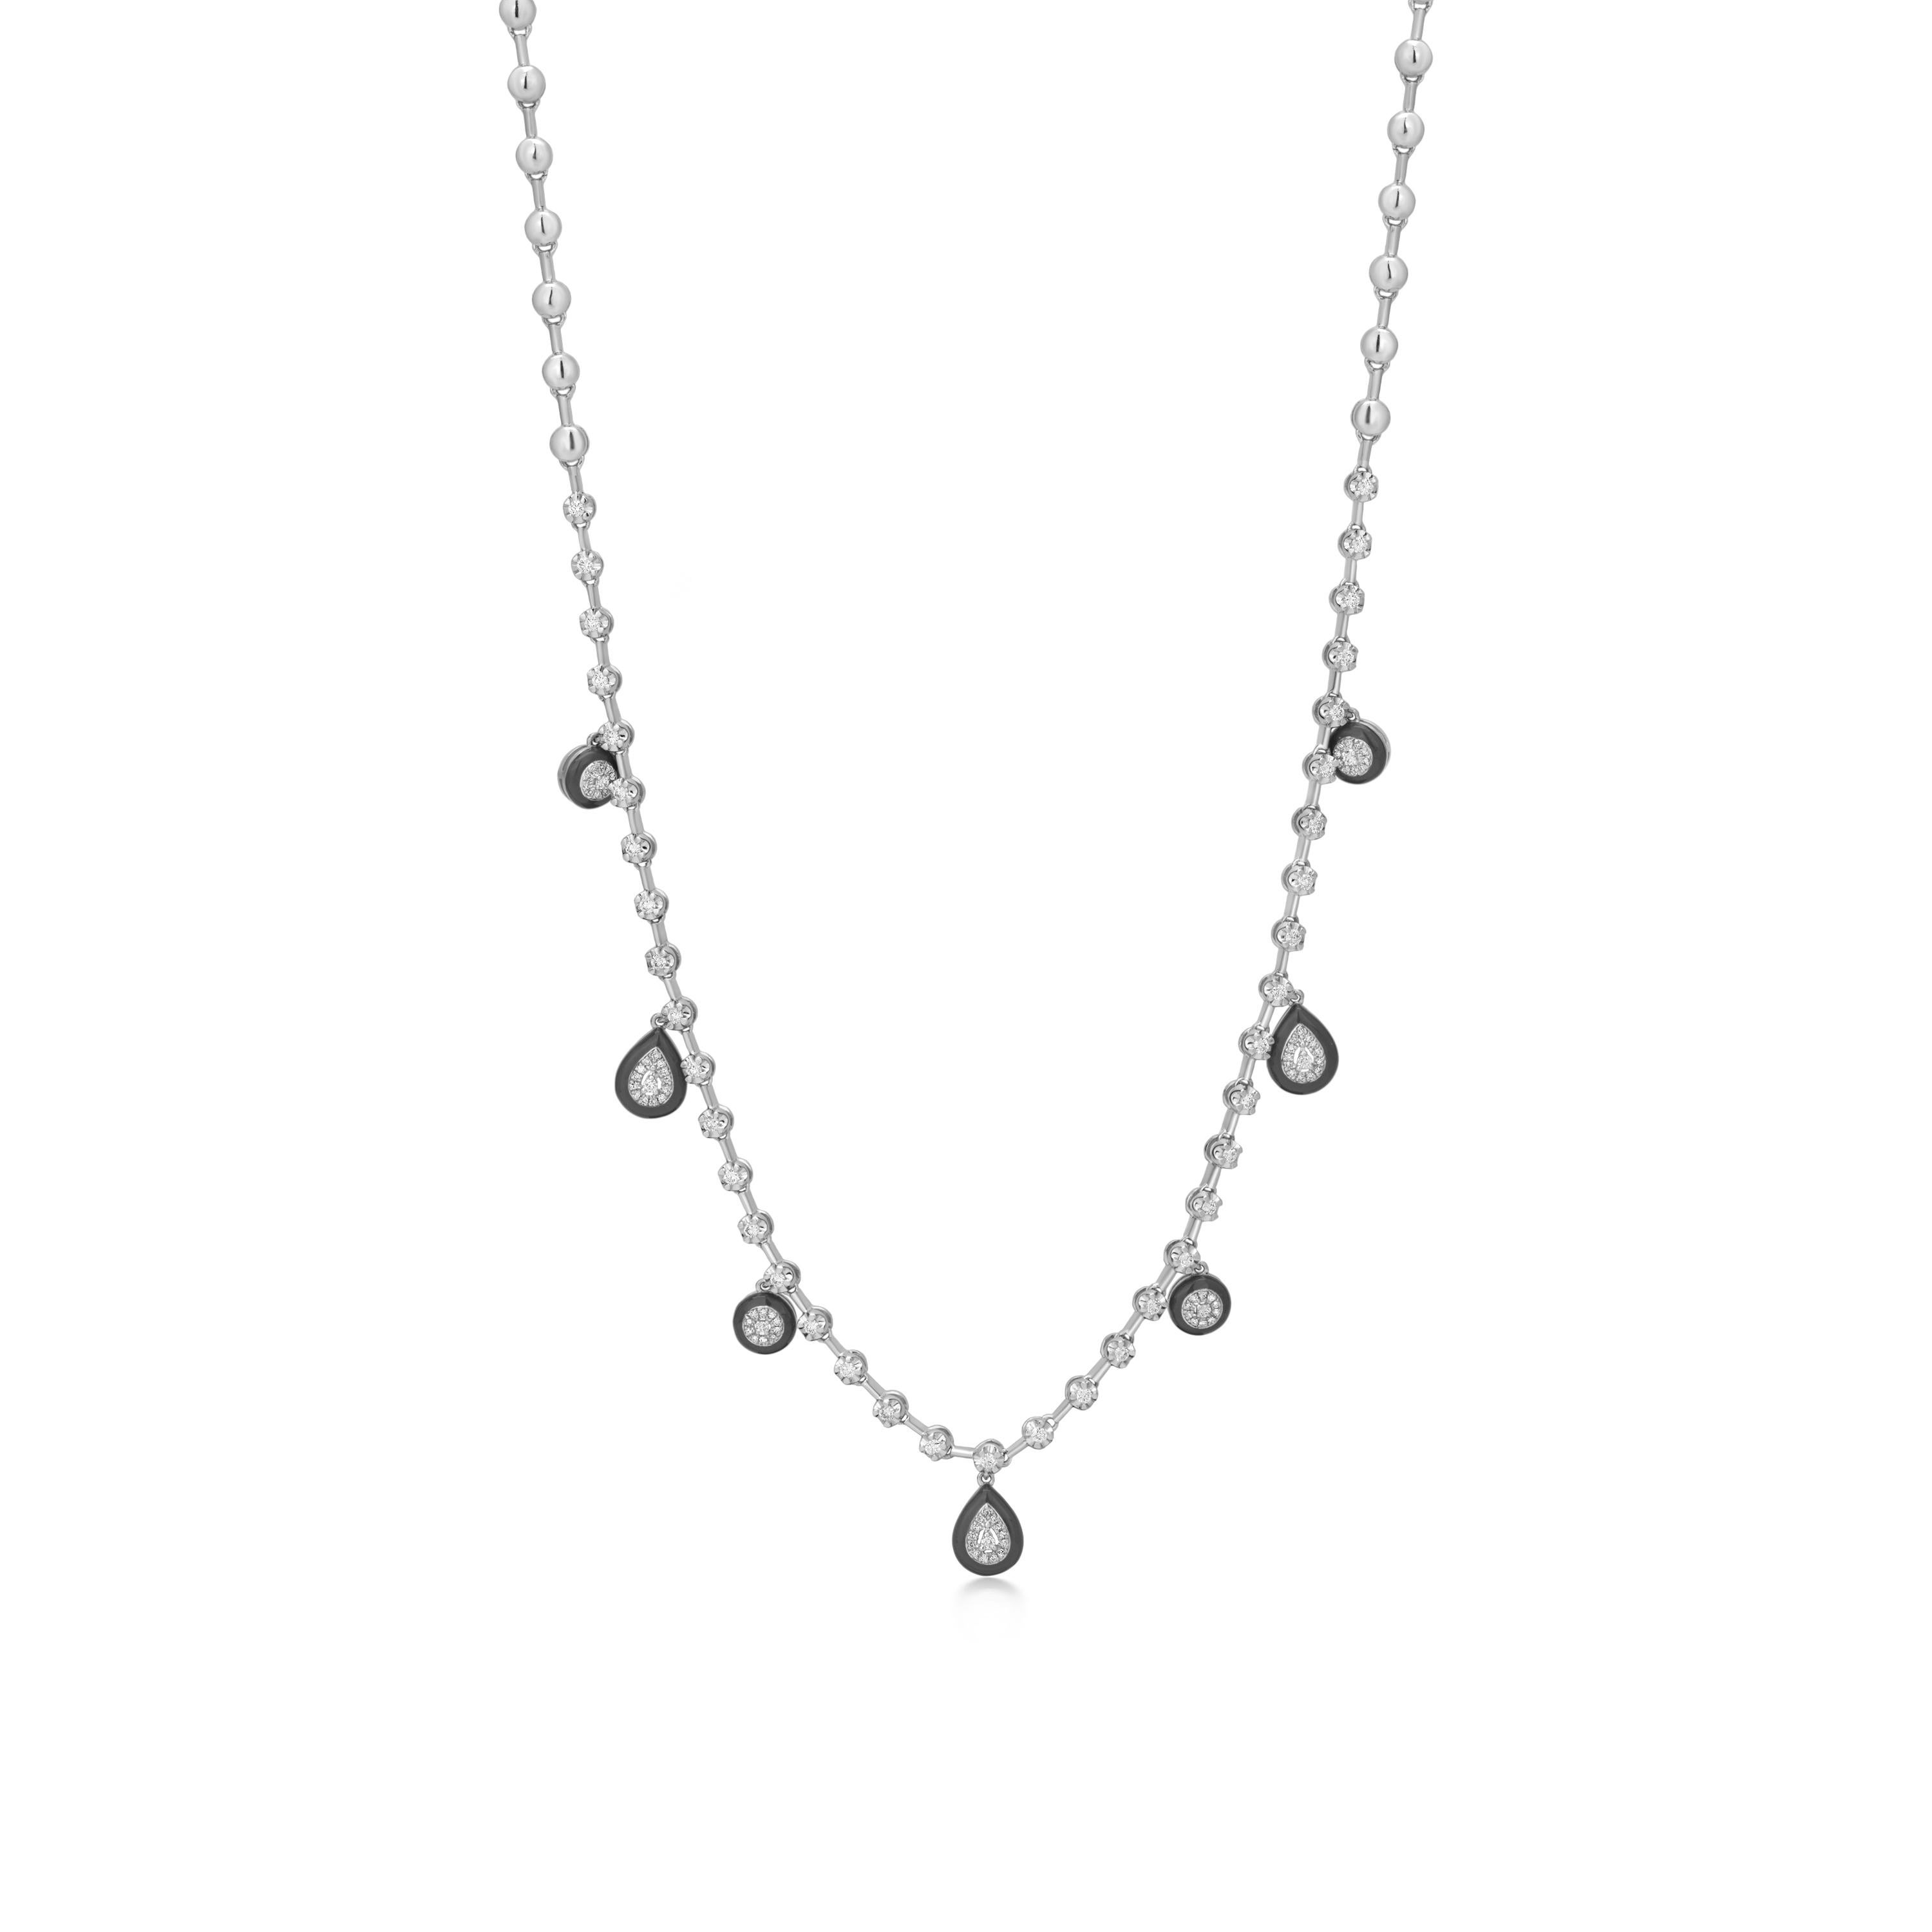 This Luxle Pear and Round charms of diamond and black enamel alternate on 18k white gold diamond-studded chain to layer your look with pops of color and elegance. Lobster clasp, diamond charm necklace. Length 15 inches.
Please follow the Luxury